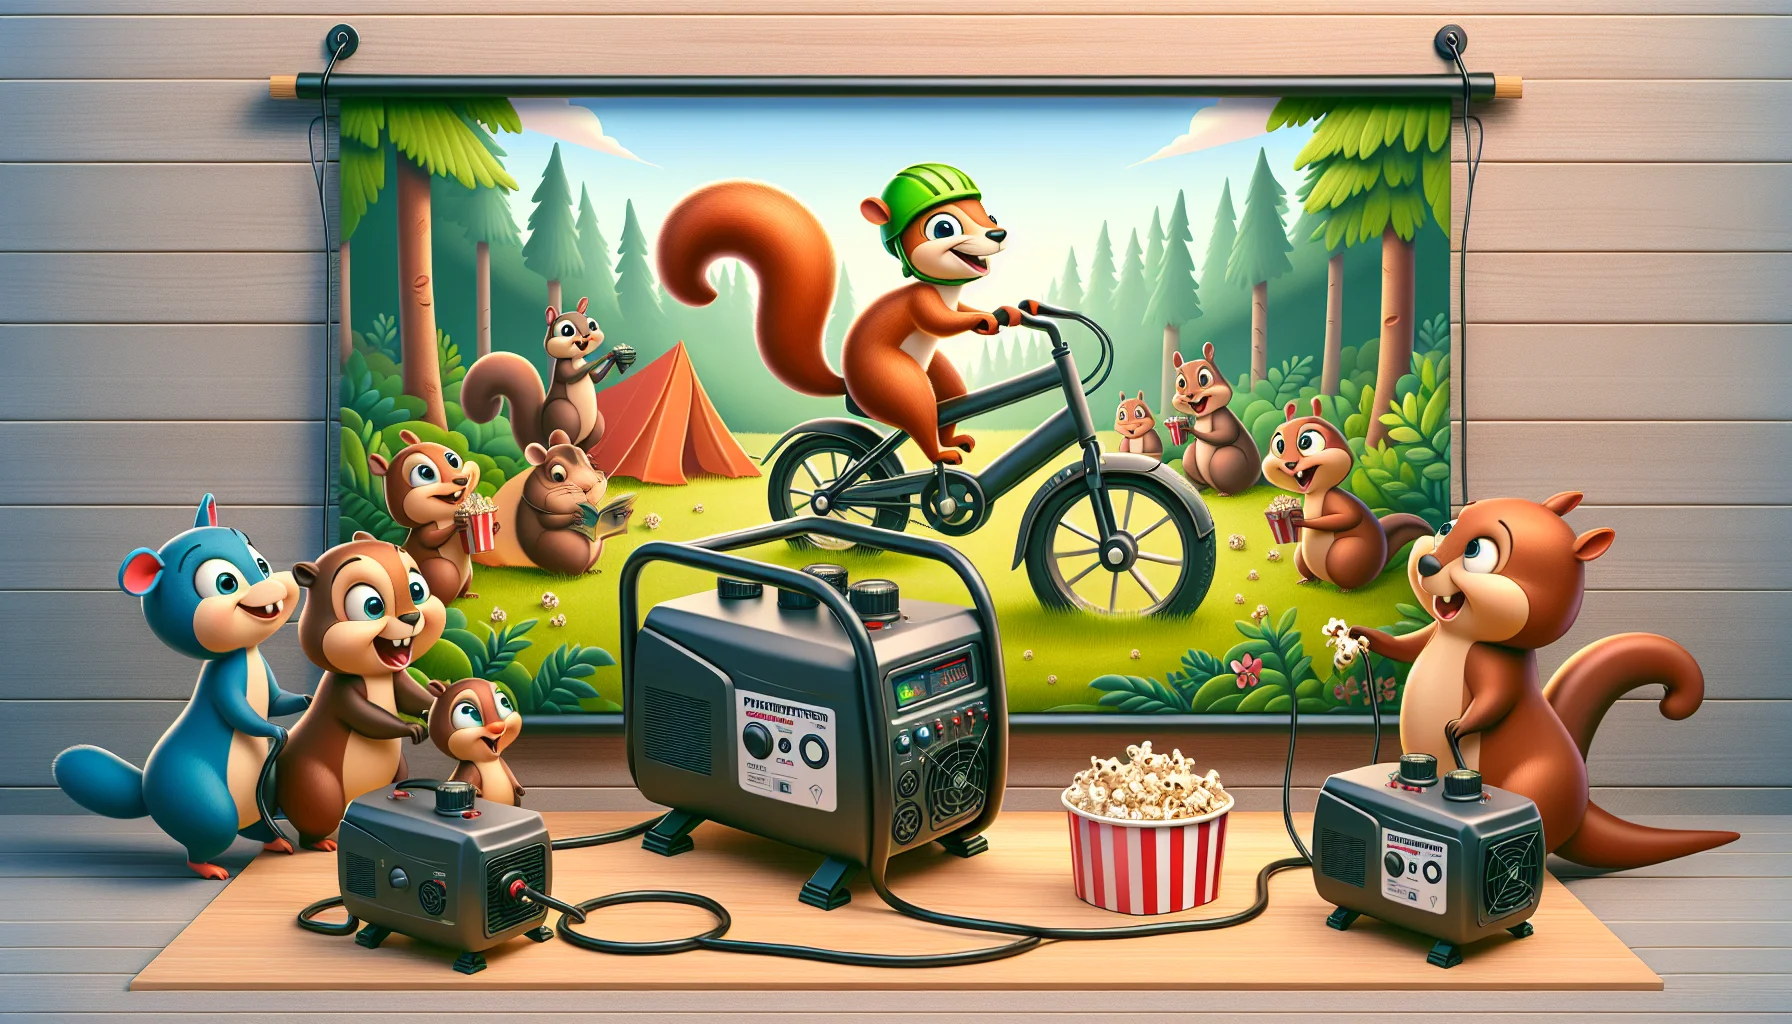 Design a humorous and engaging scene centered around a parallel kit for inverter generators. Picture a camping backdrop in a lush forest populated by friendly and comical woodland animals. Against this backdrop, two parallel-connected inverter generators, styled to look like hard-working ants with safety helmets, are energetically funneling energy. Spirits are high among the animals who are staging an open-air woodland cinema event, taking turns to ride a stationary bike attached to the generators. The squirrel, for instance, is pedaling like a little champion, while other animals are waiting in line, munching on popcorn, completely enthralled by the human activity replicated by these friendly woodland characters.